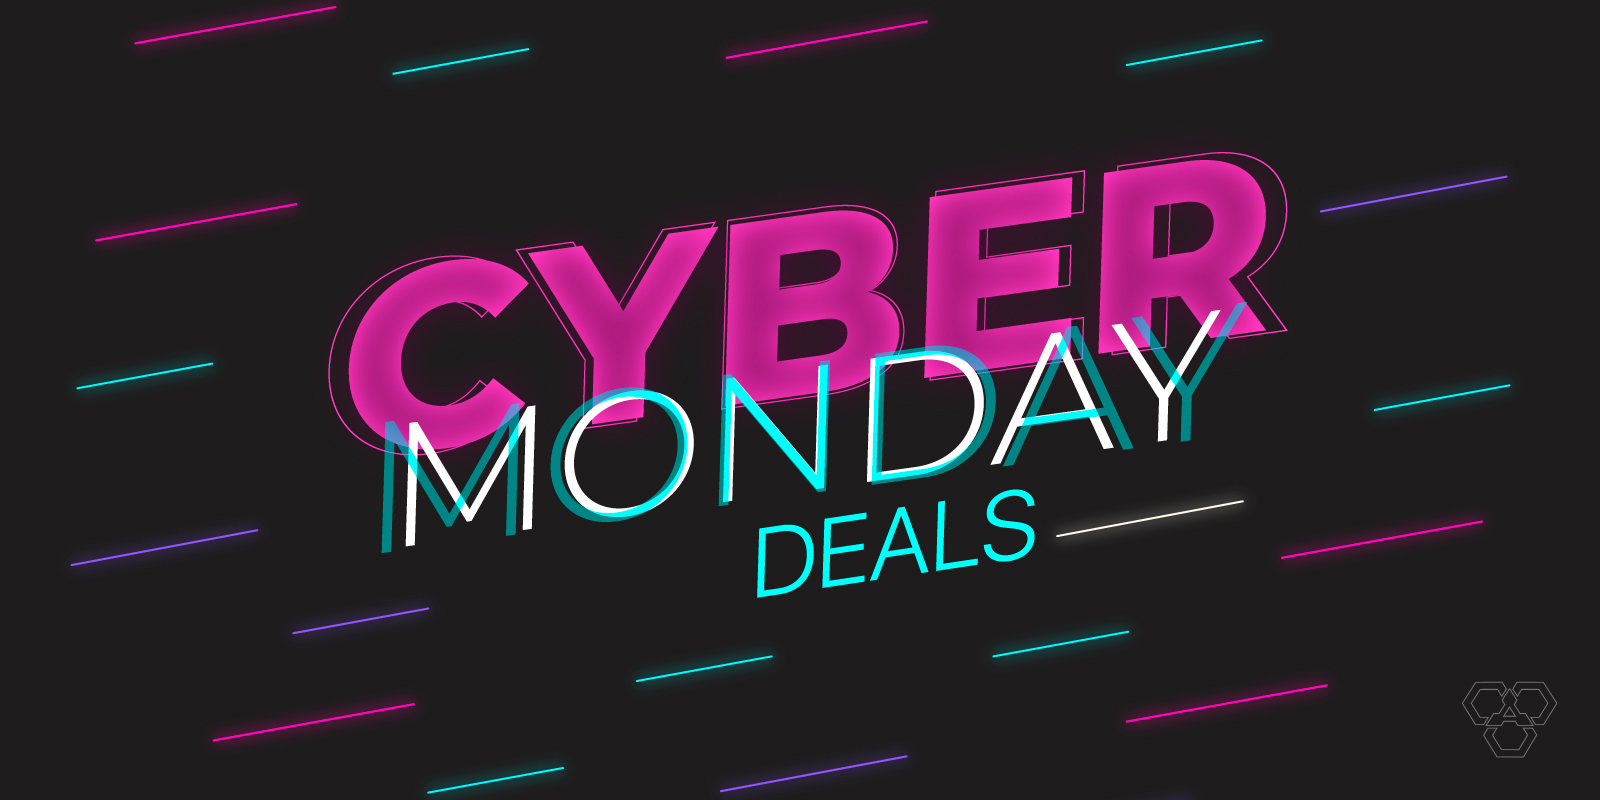 Cyber Monday Dining Room Sets Deals